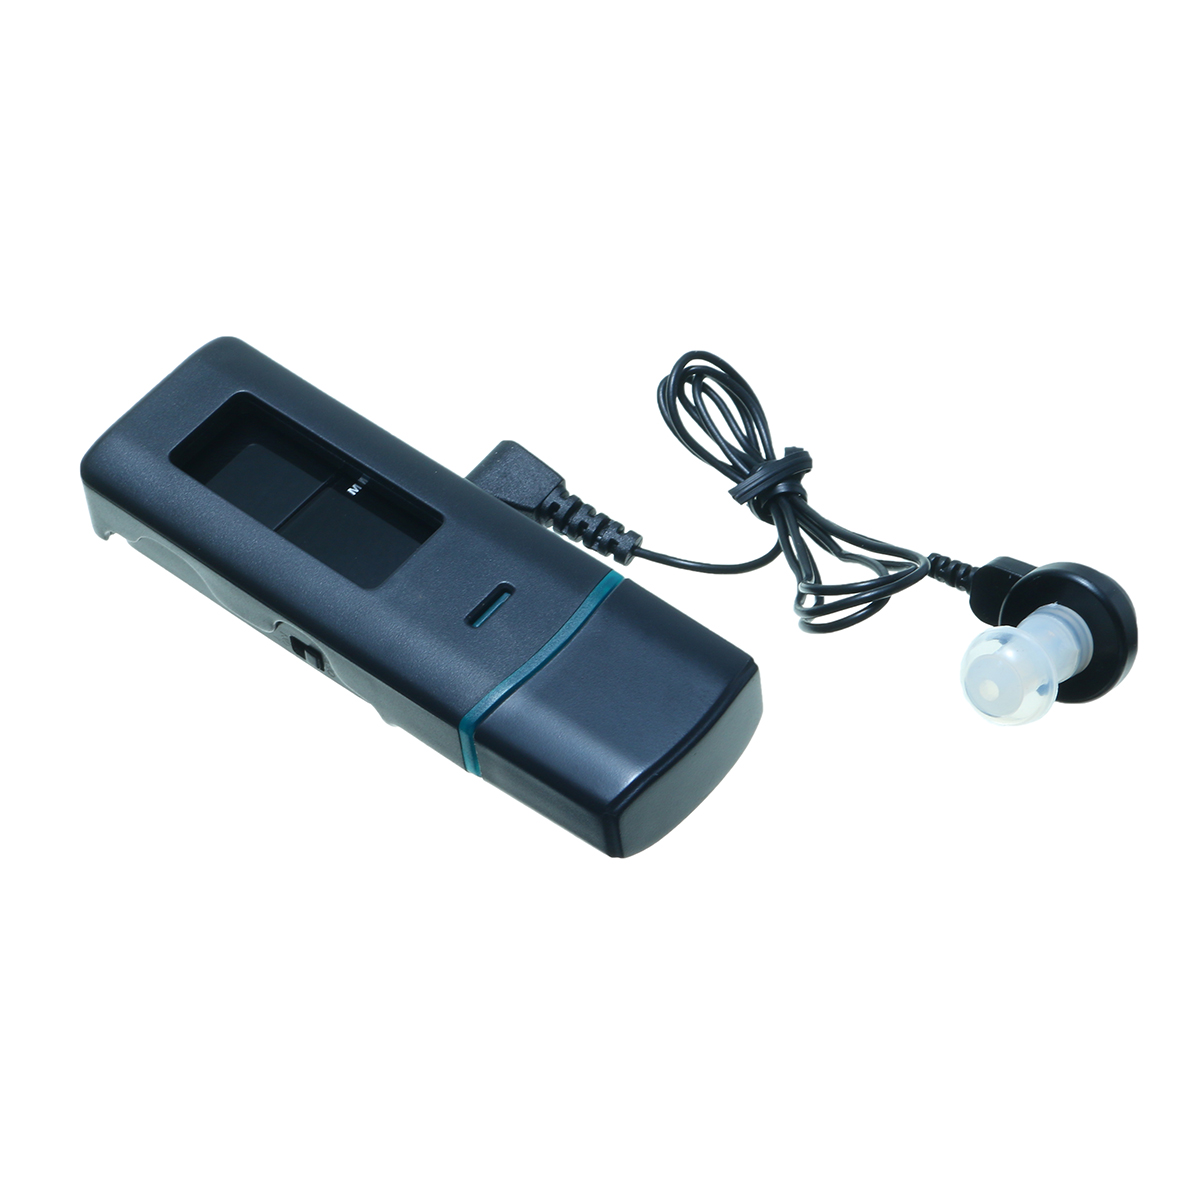 Digital-Rechargeable-Clip-on-Hearing-Aid-Ear-Kit-Anti-Bacteria-Sound-Voice-Amplifier-KXW-180C-1209358